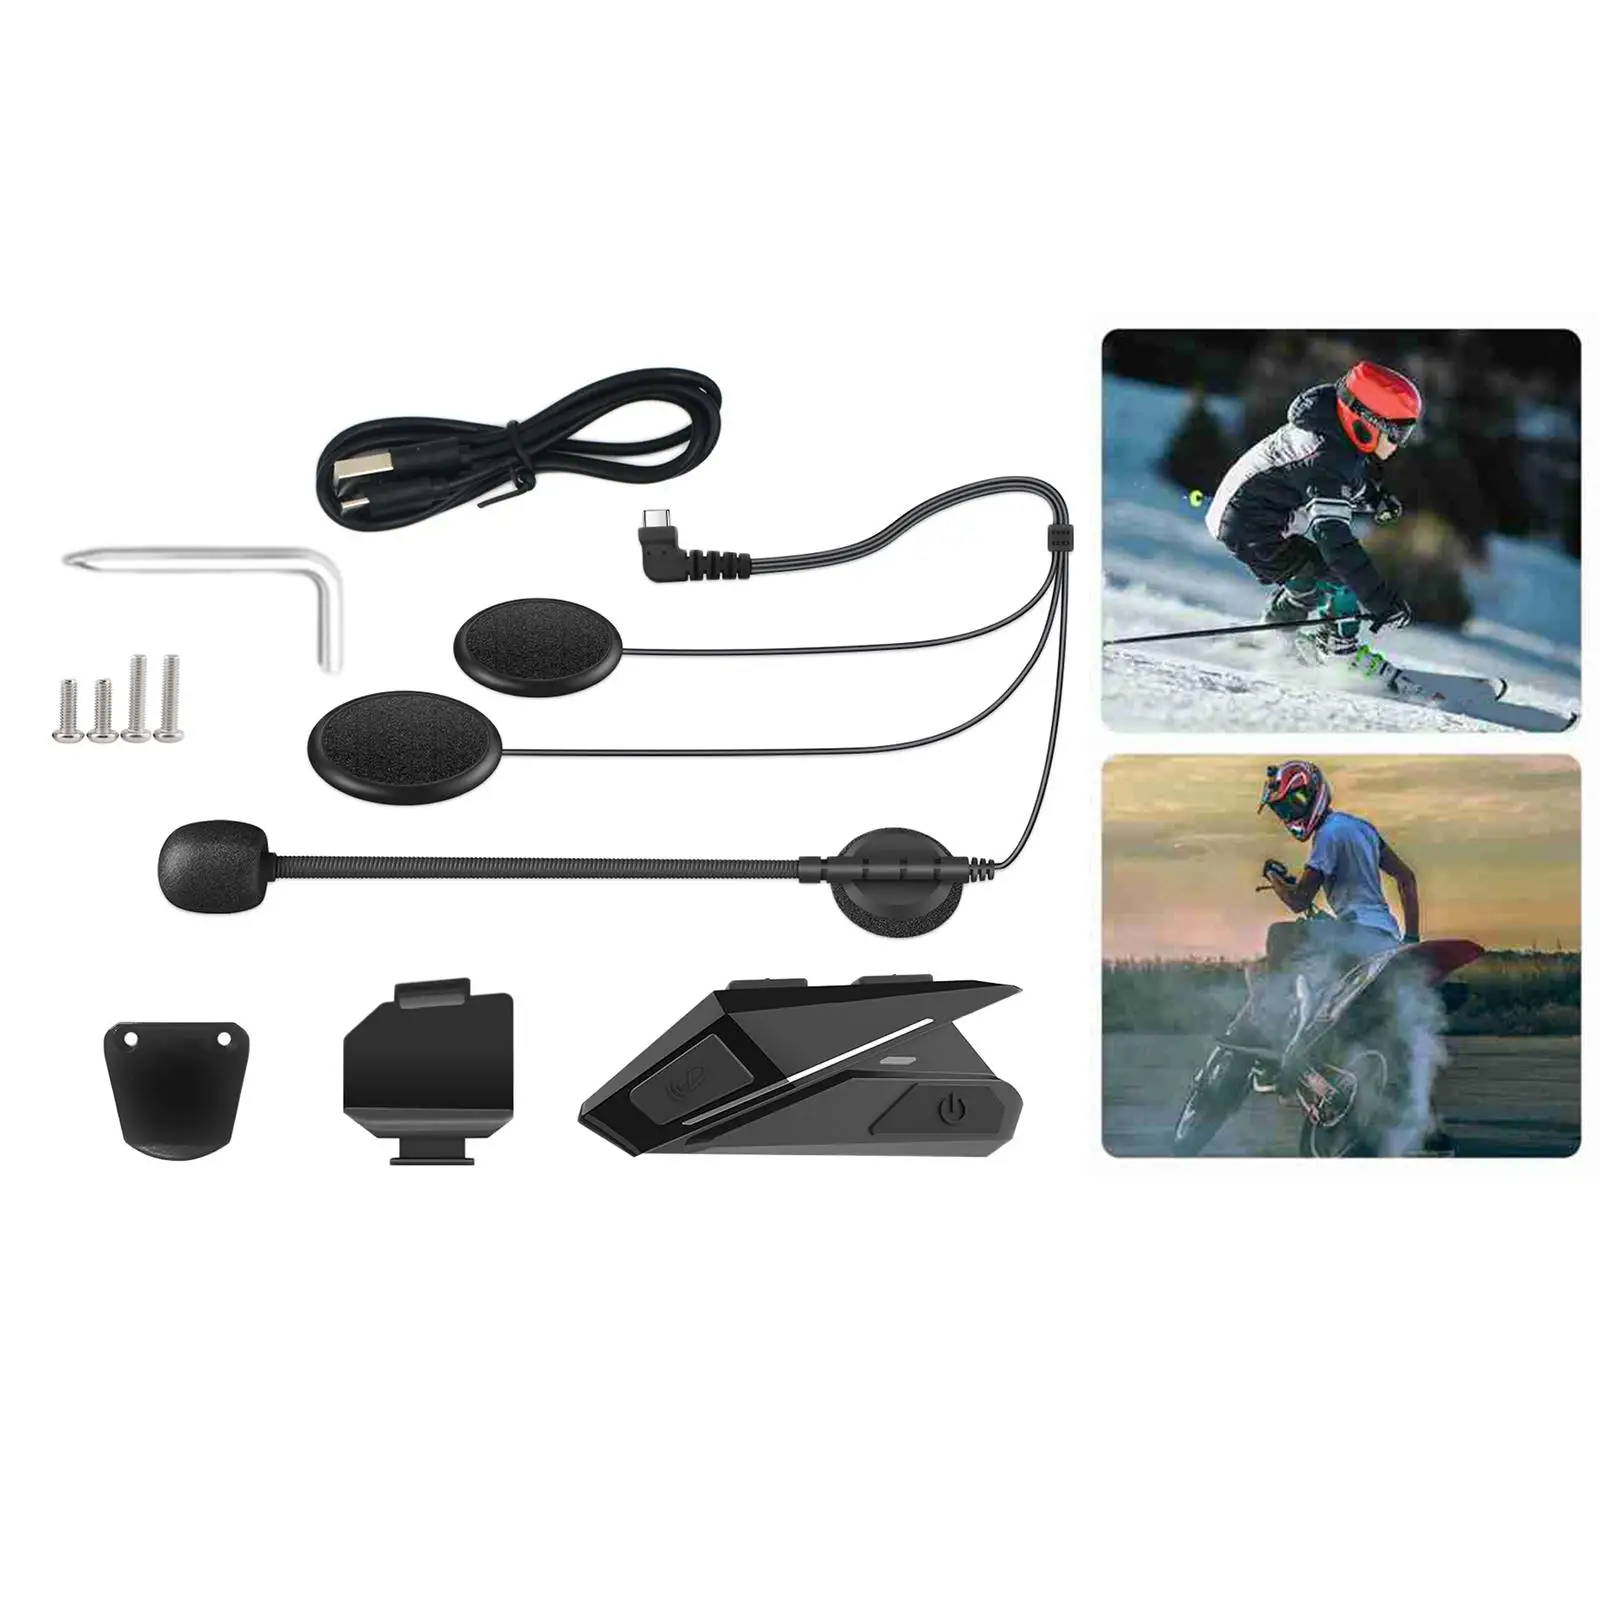 Motorcycle Bluetooth 5.0 Headset with FM Radio 10H Playing Time 450mAh Battery Headphone for Most Helmets Outdoor Sports Riding